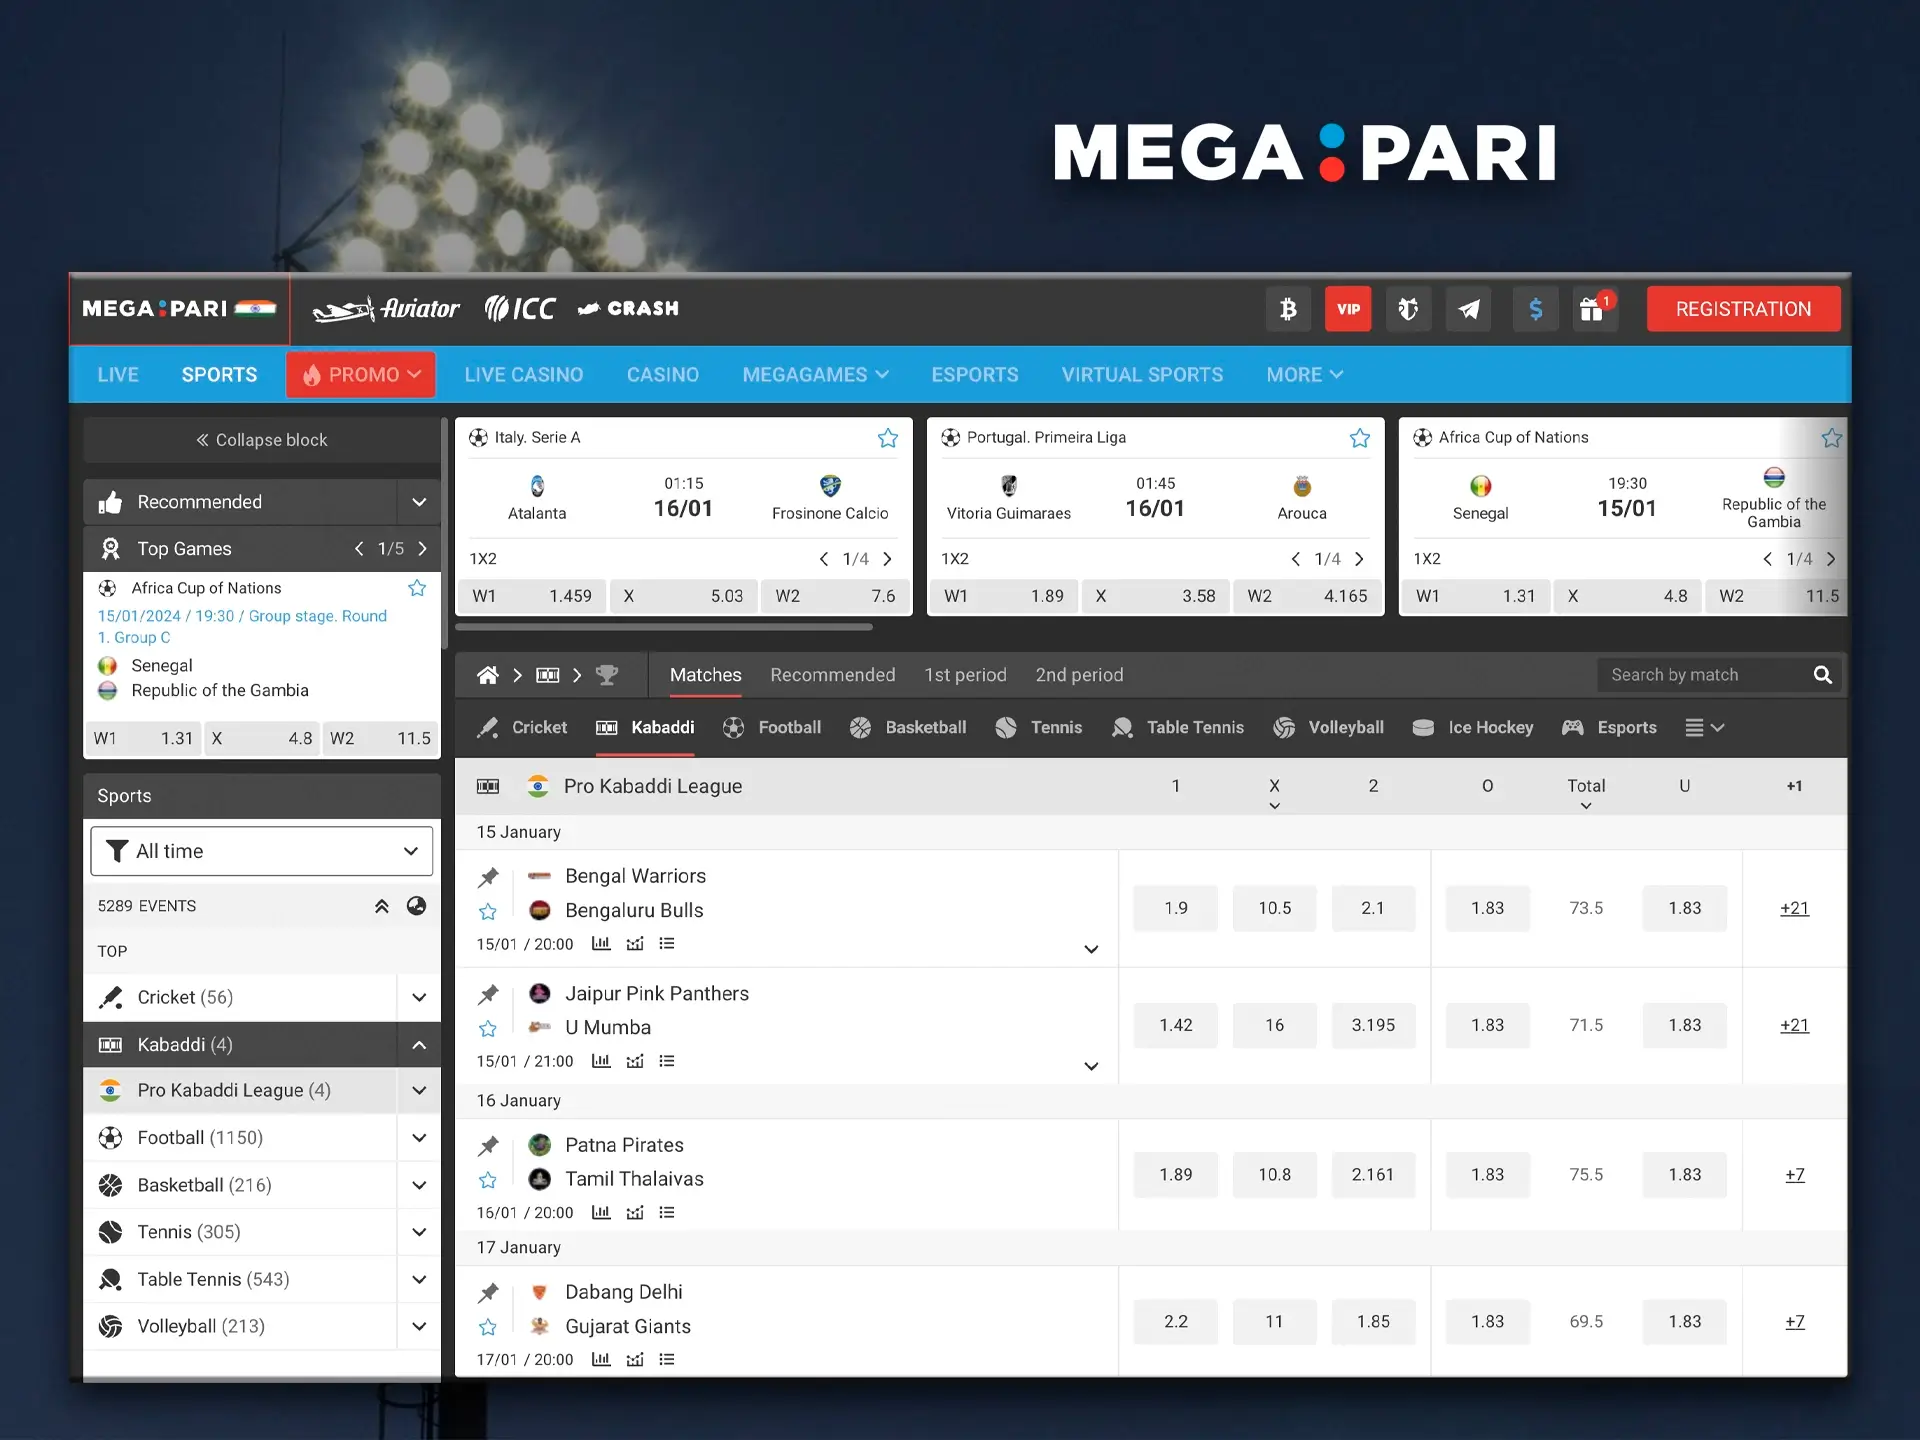 Megapari will give you lots of emotions and cash winnings when betting on Kabaddi.